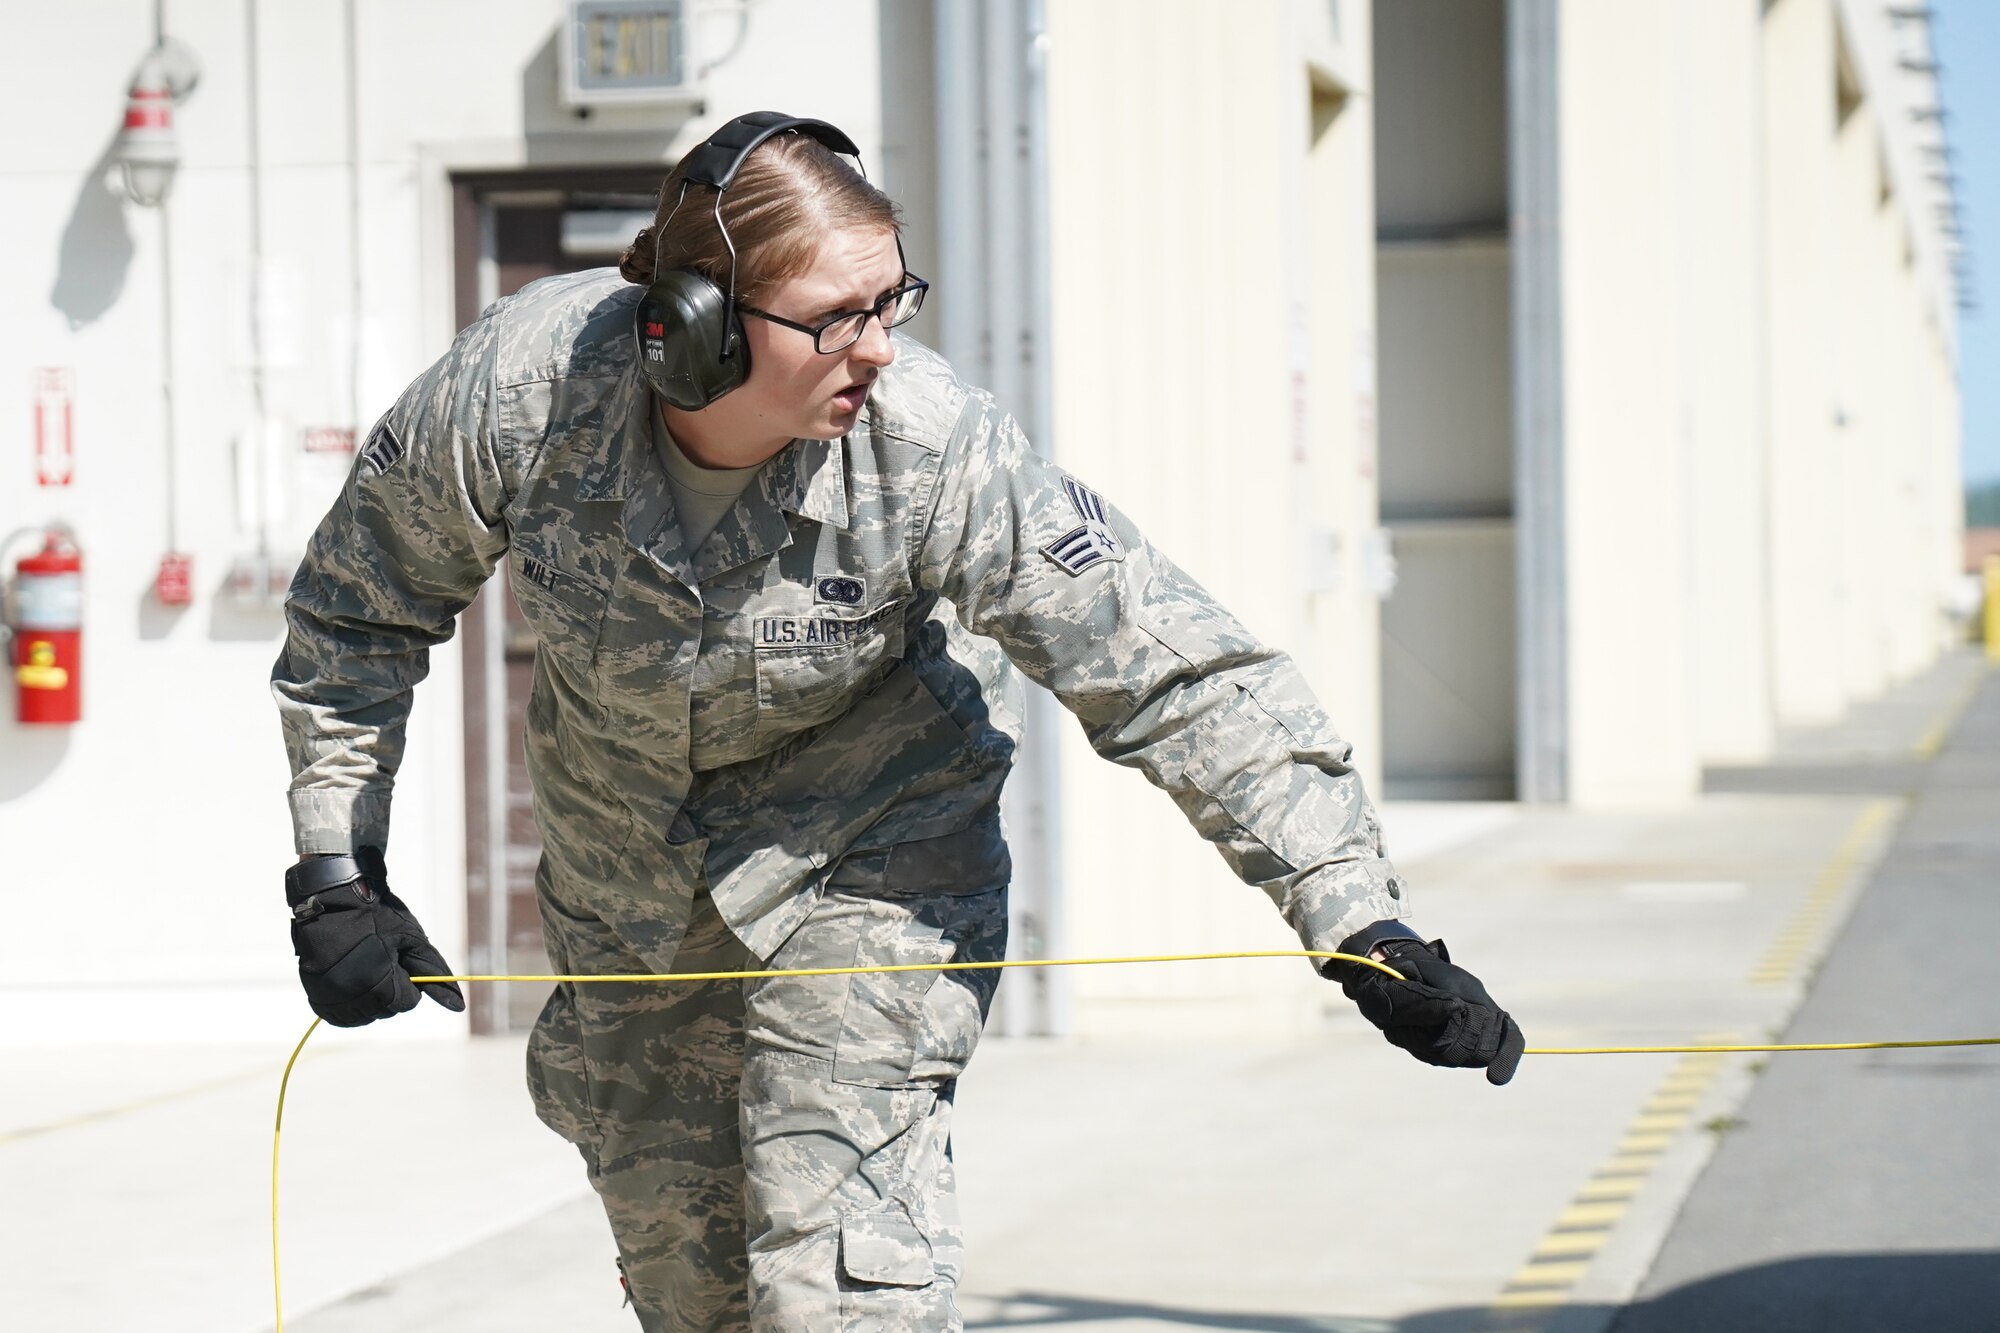 Senior Airman Jessica Wilt, a native of Washington Court House, Ohio, assigned to the 673d Logistics Readiness Squadron, uncoils a grounding cable before refueling an F-22 Raptor of the 525th Fighter Squadron (the Bulldogs) on Joint Base Elmendorf-Richardson, Alaska, Aug. 9, 2019.  Fuels specialists manage every aspect of the refueling every aircraft on the flight line and are responsible for operating the vehicles, equipment and storage facilities that are essential to refueling operations while ensuring compliance with all safety regulations while handling these volatile liquids.